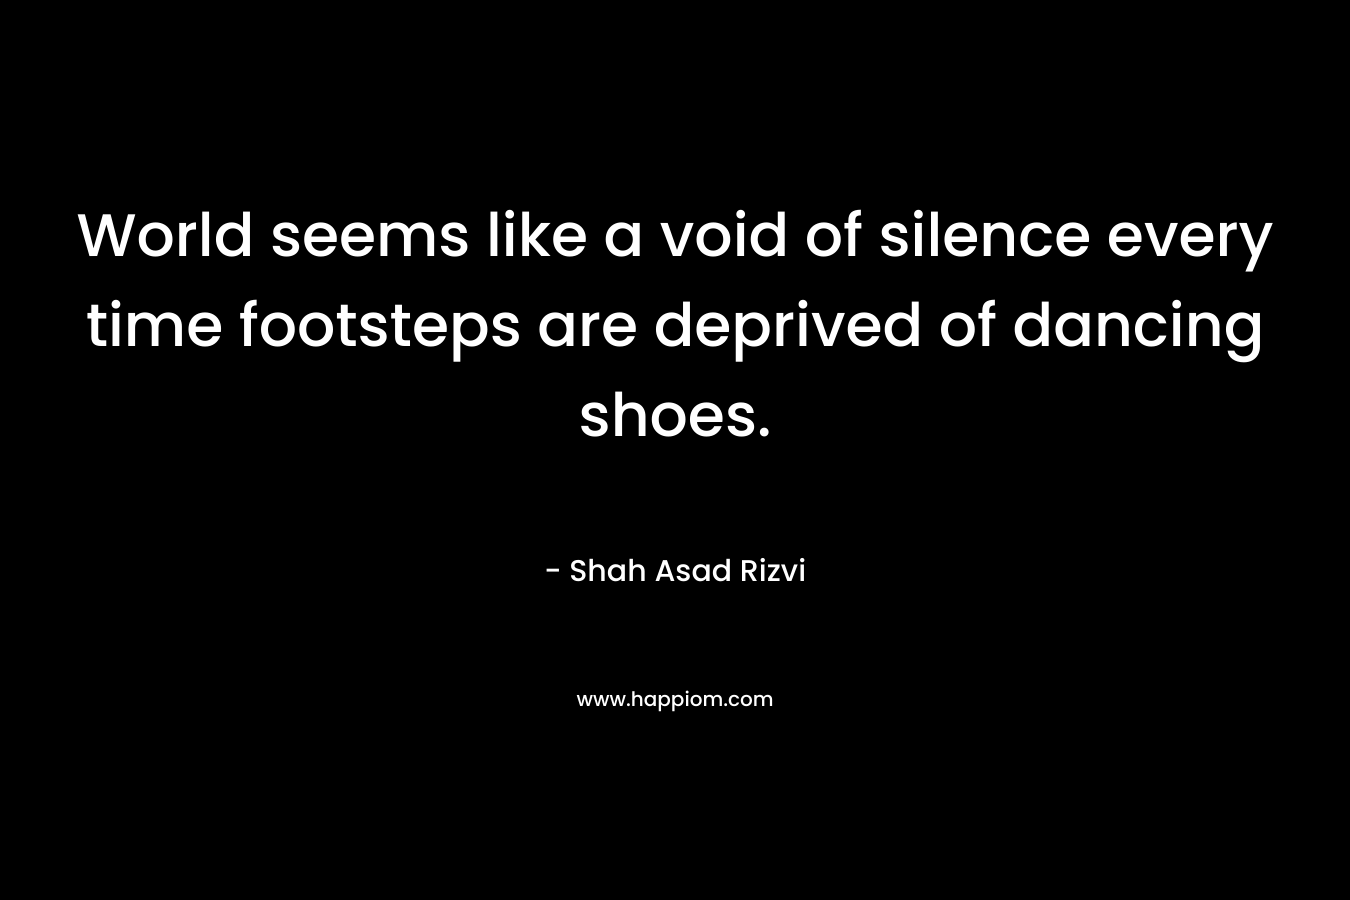 World seems like a void of silence every time footsteps are deprived of dancing shoes. – Shah Asad Rizvi